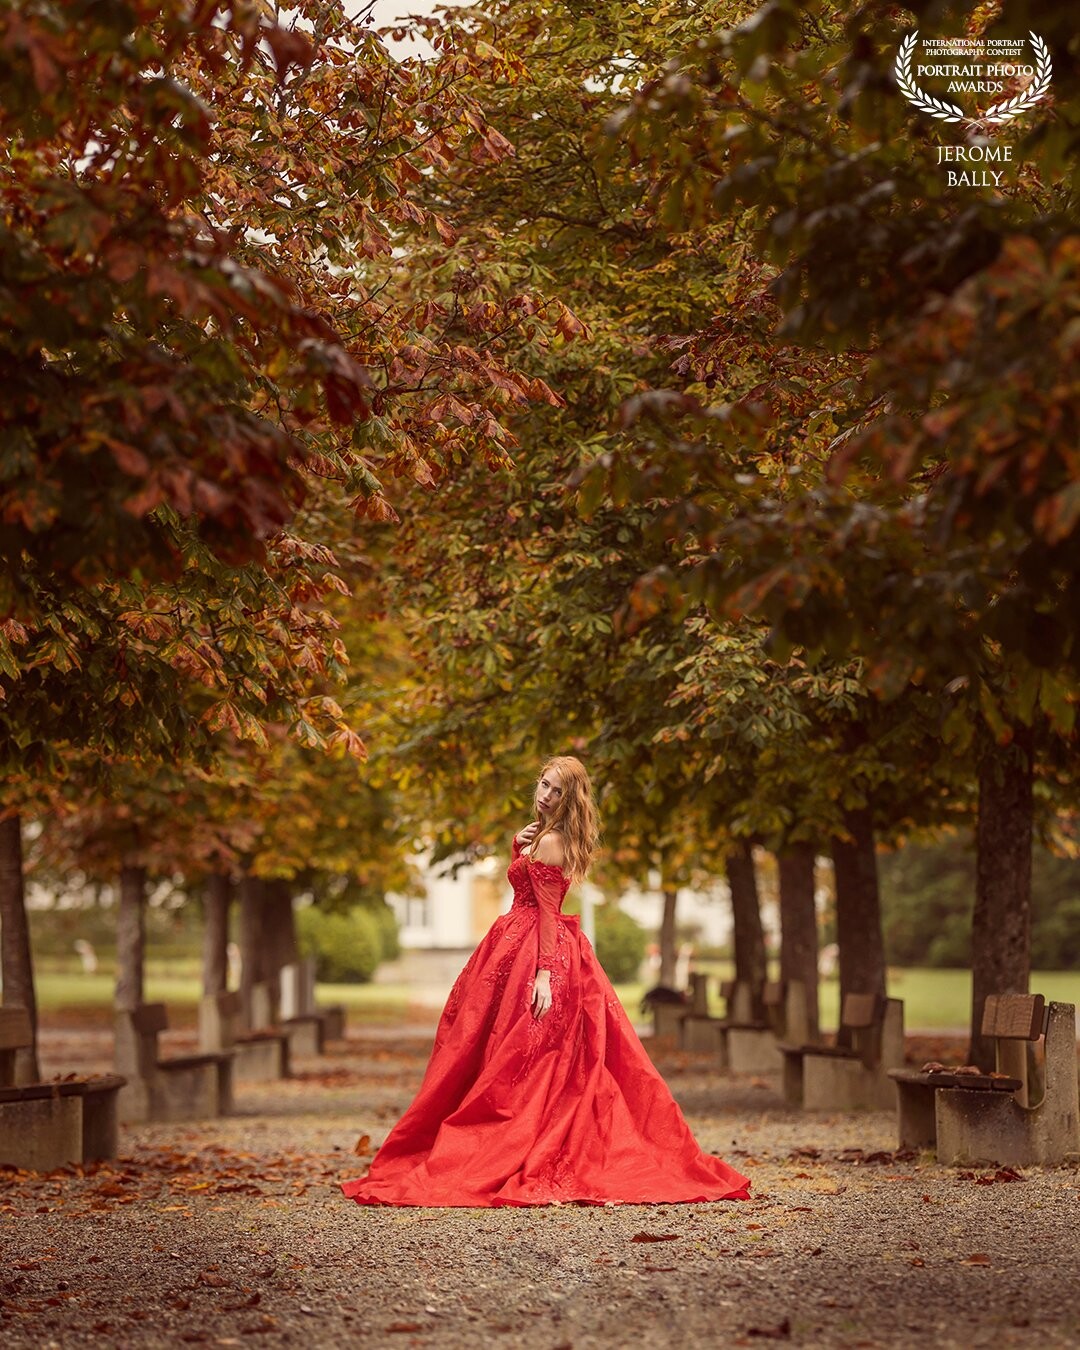 Autumn is such a beautiful time in the year. All leaves are getting yellowish and red. It was the perfect scene for @mme_gingerella. Her red dress and her ginger hair are such a beauty in this colorful alley.